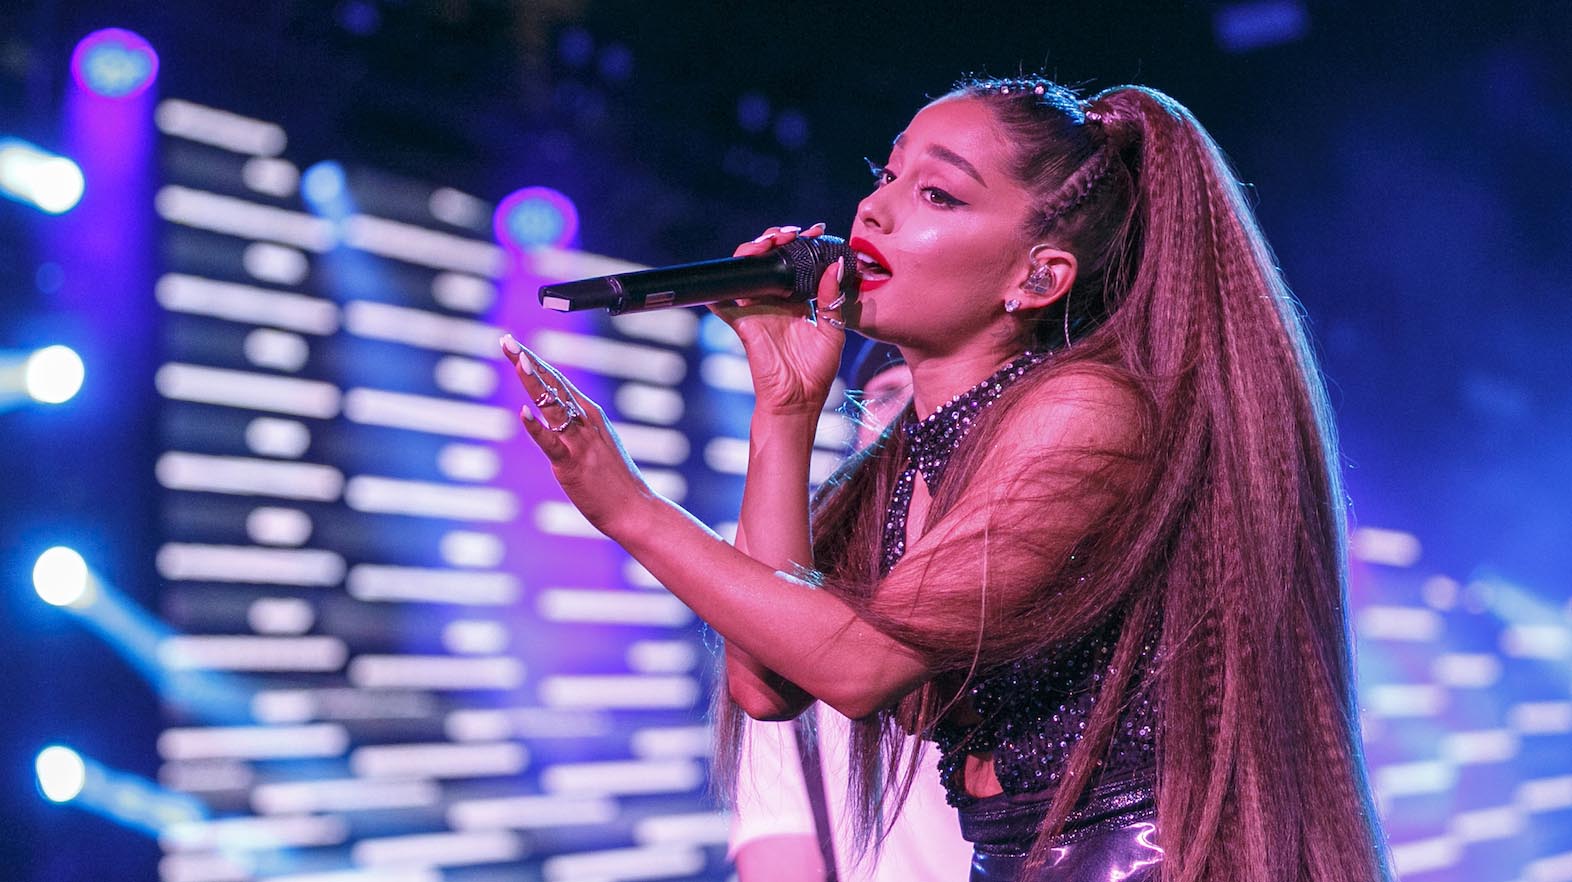 Ariana Grande Photo by Rich Polk/Getty Images for iHeartMedia